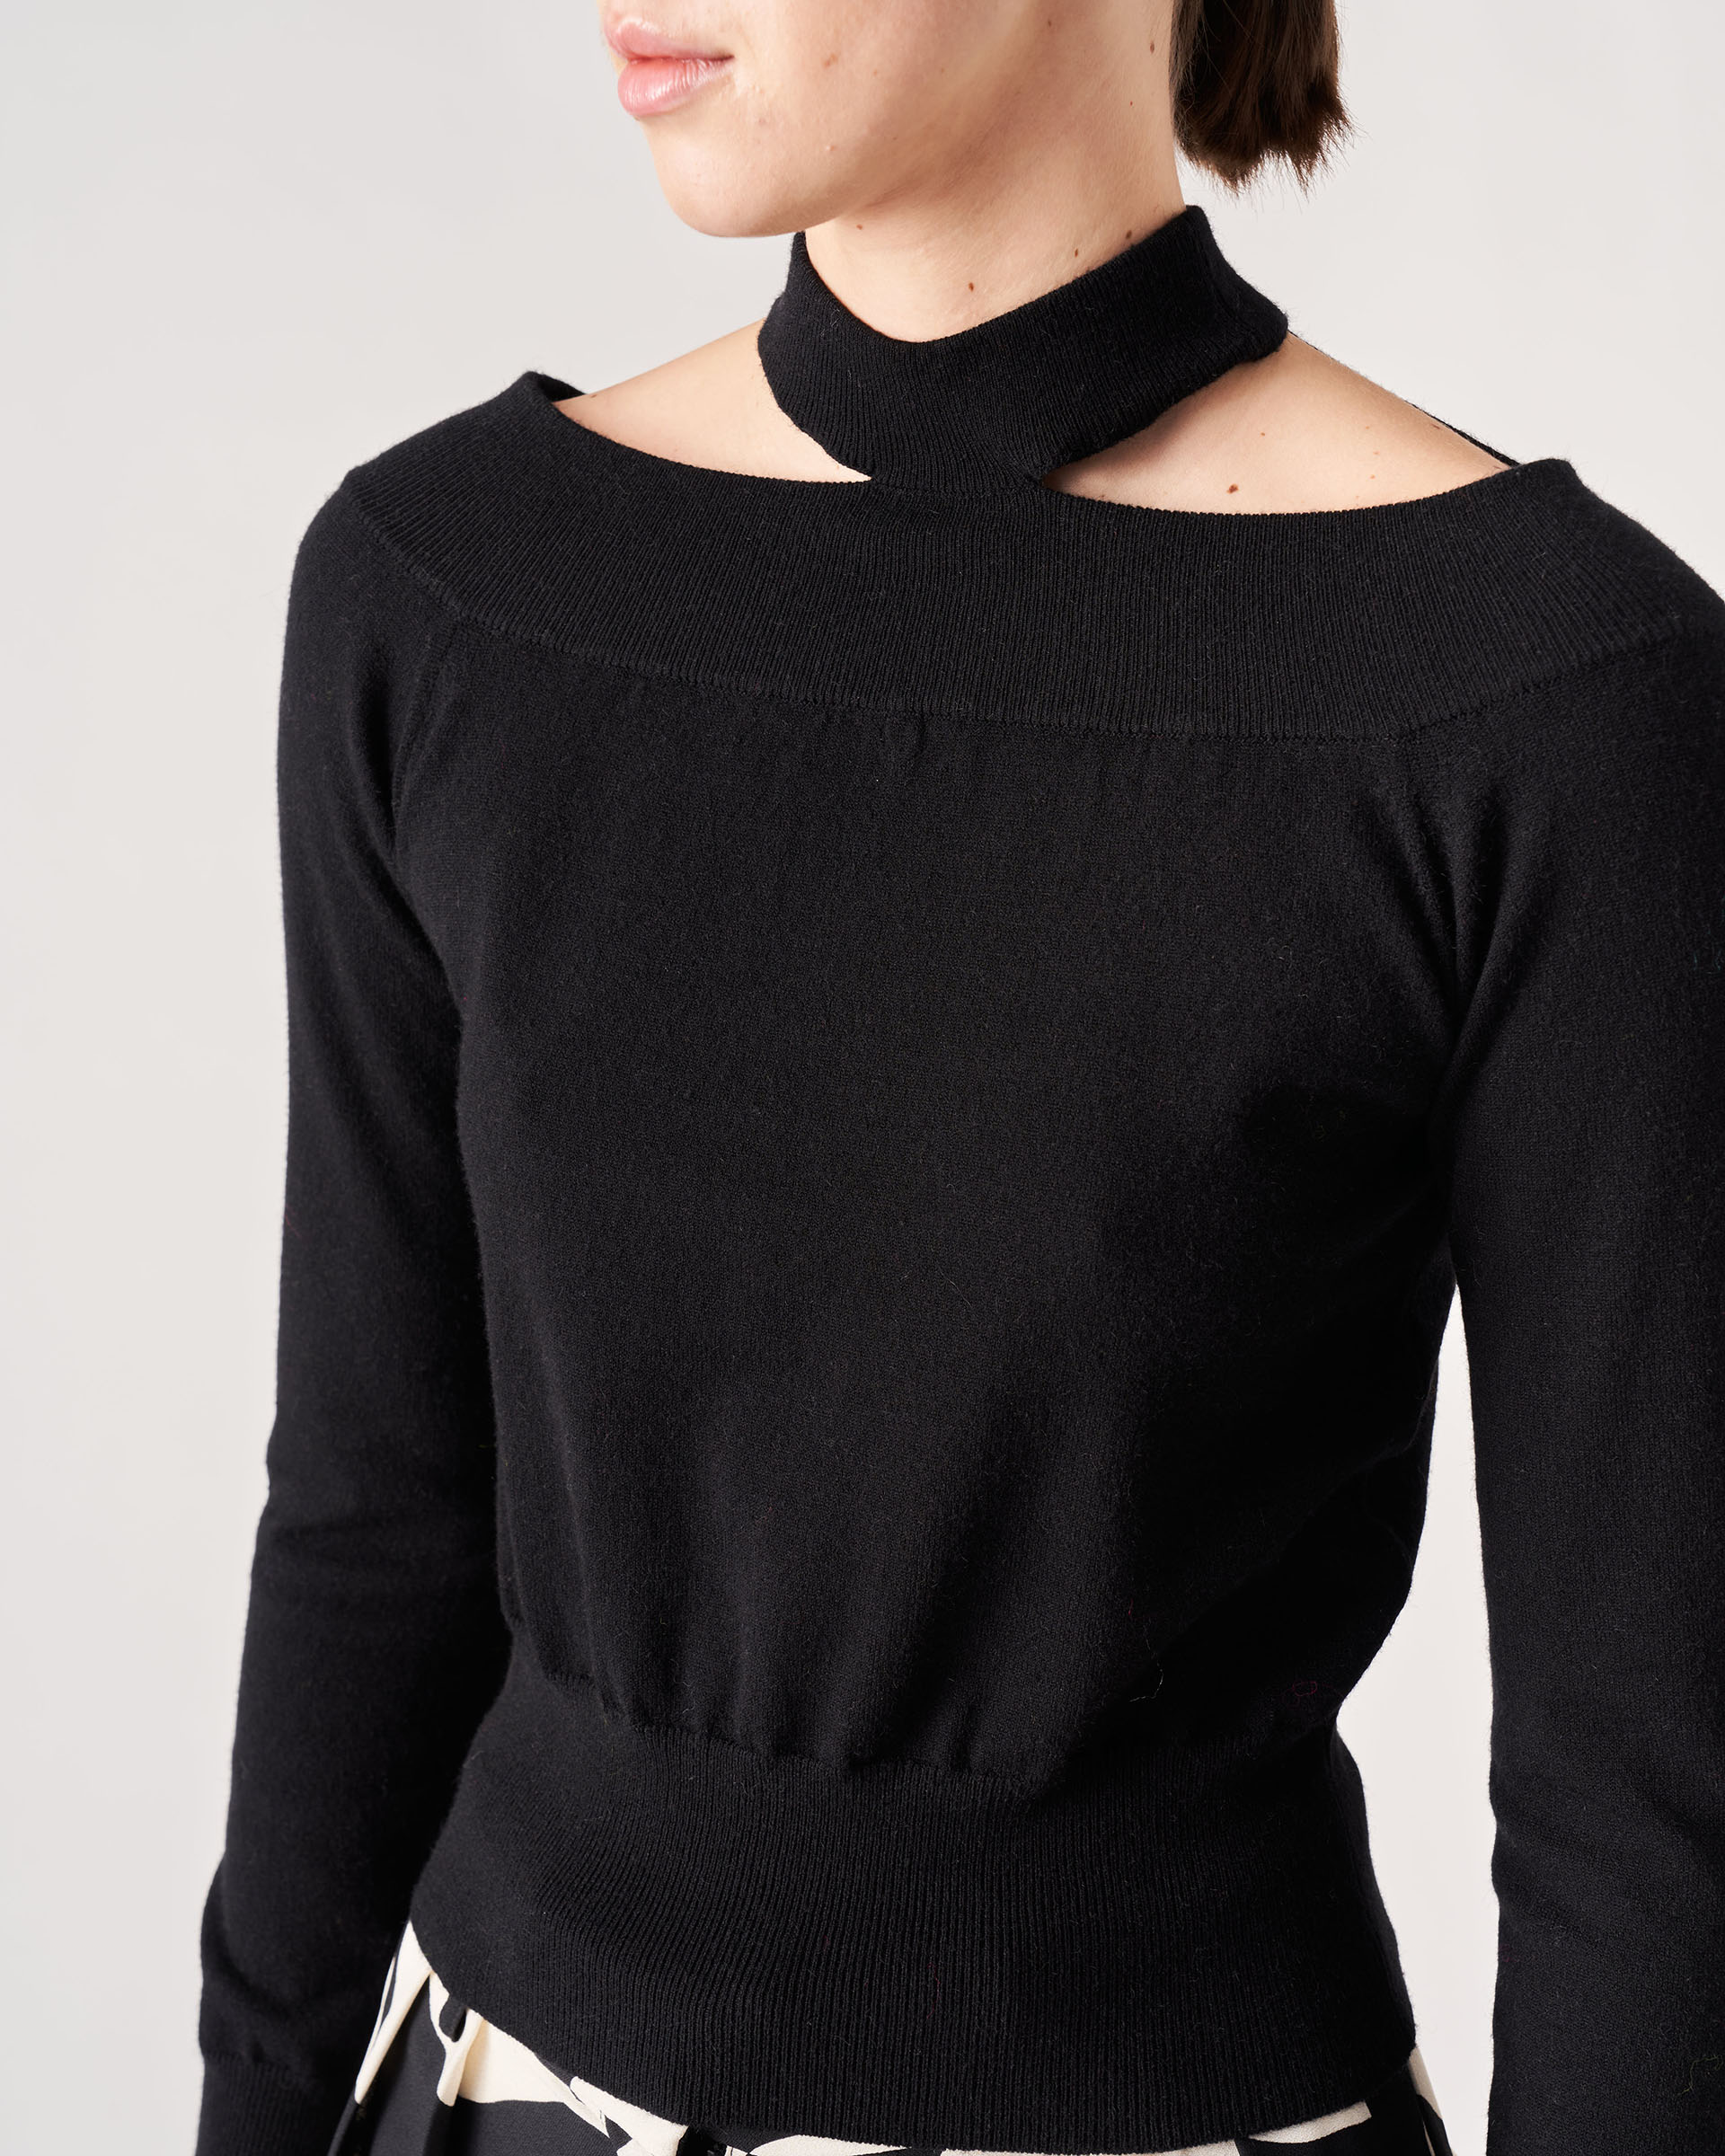 The Market Store | Low-cut Sweater With Turtleneck